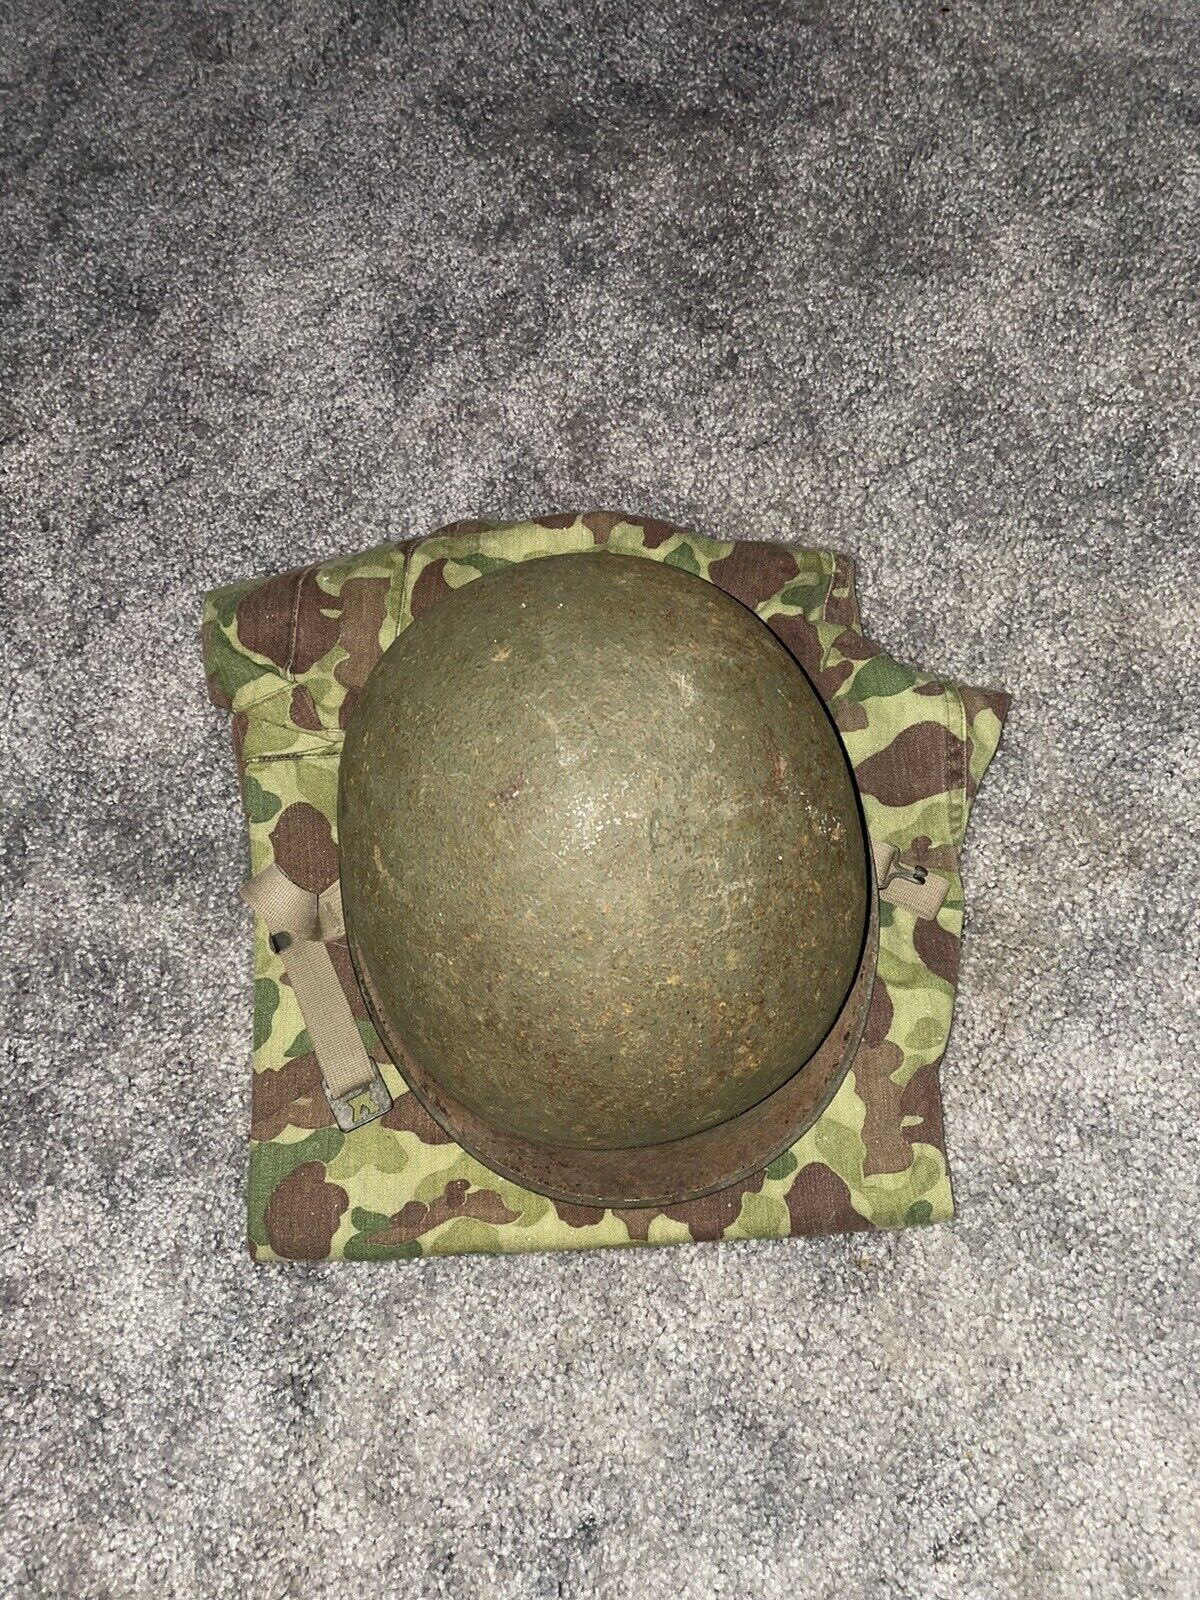 Authentic WWII US ARMY Special Forces Helmet and Camouflage Pants - Estate Find